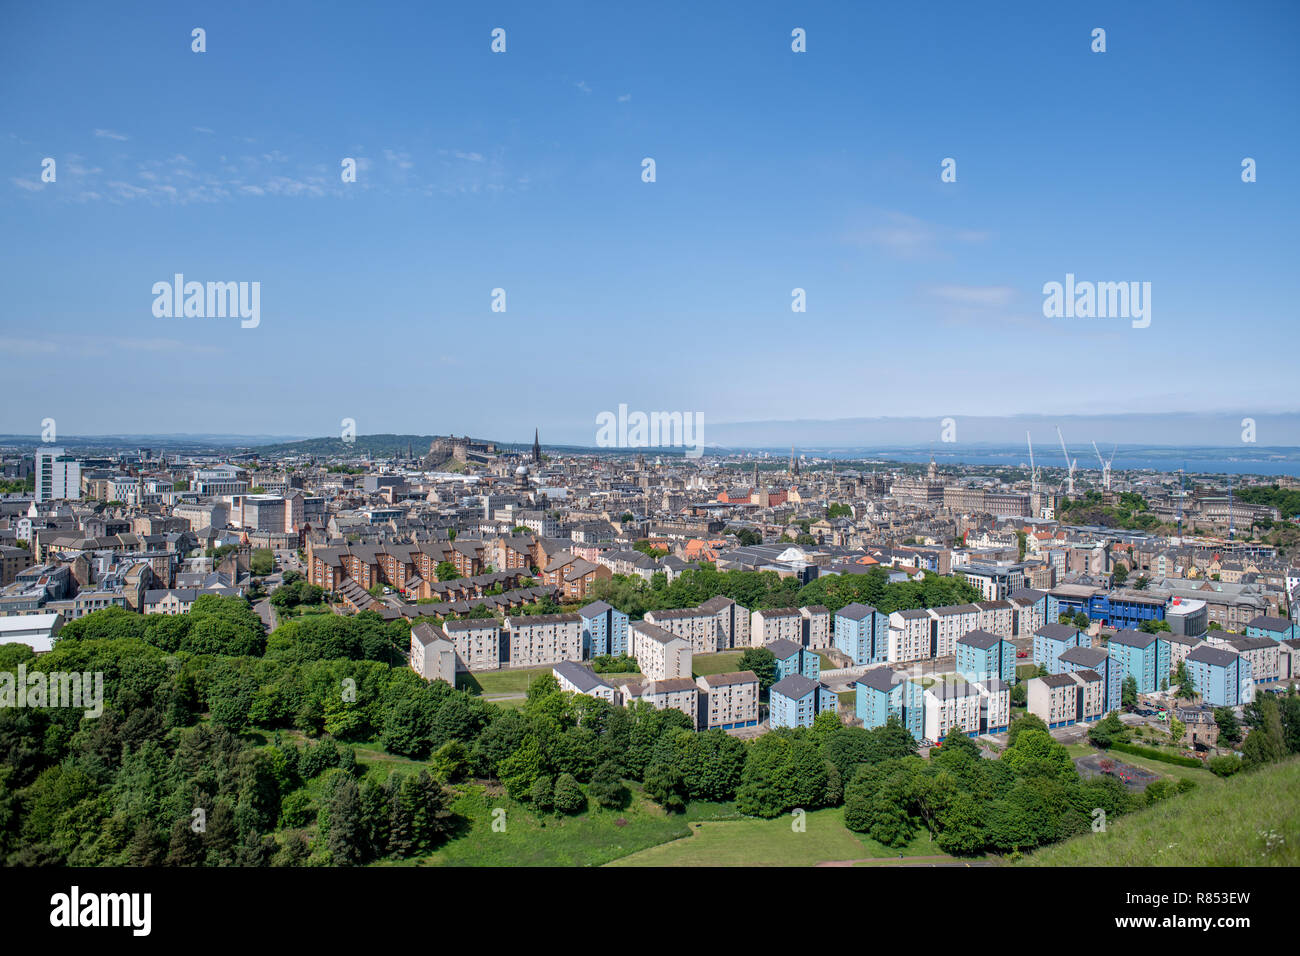 An elevated view of the iconic landmarks, rooftops and the cityscape of Edinburgh, Scotland, UK. Stock Photo